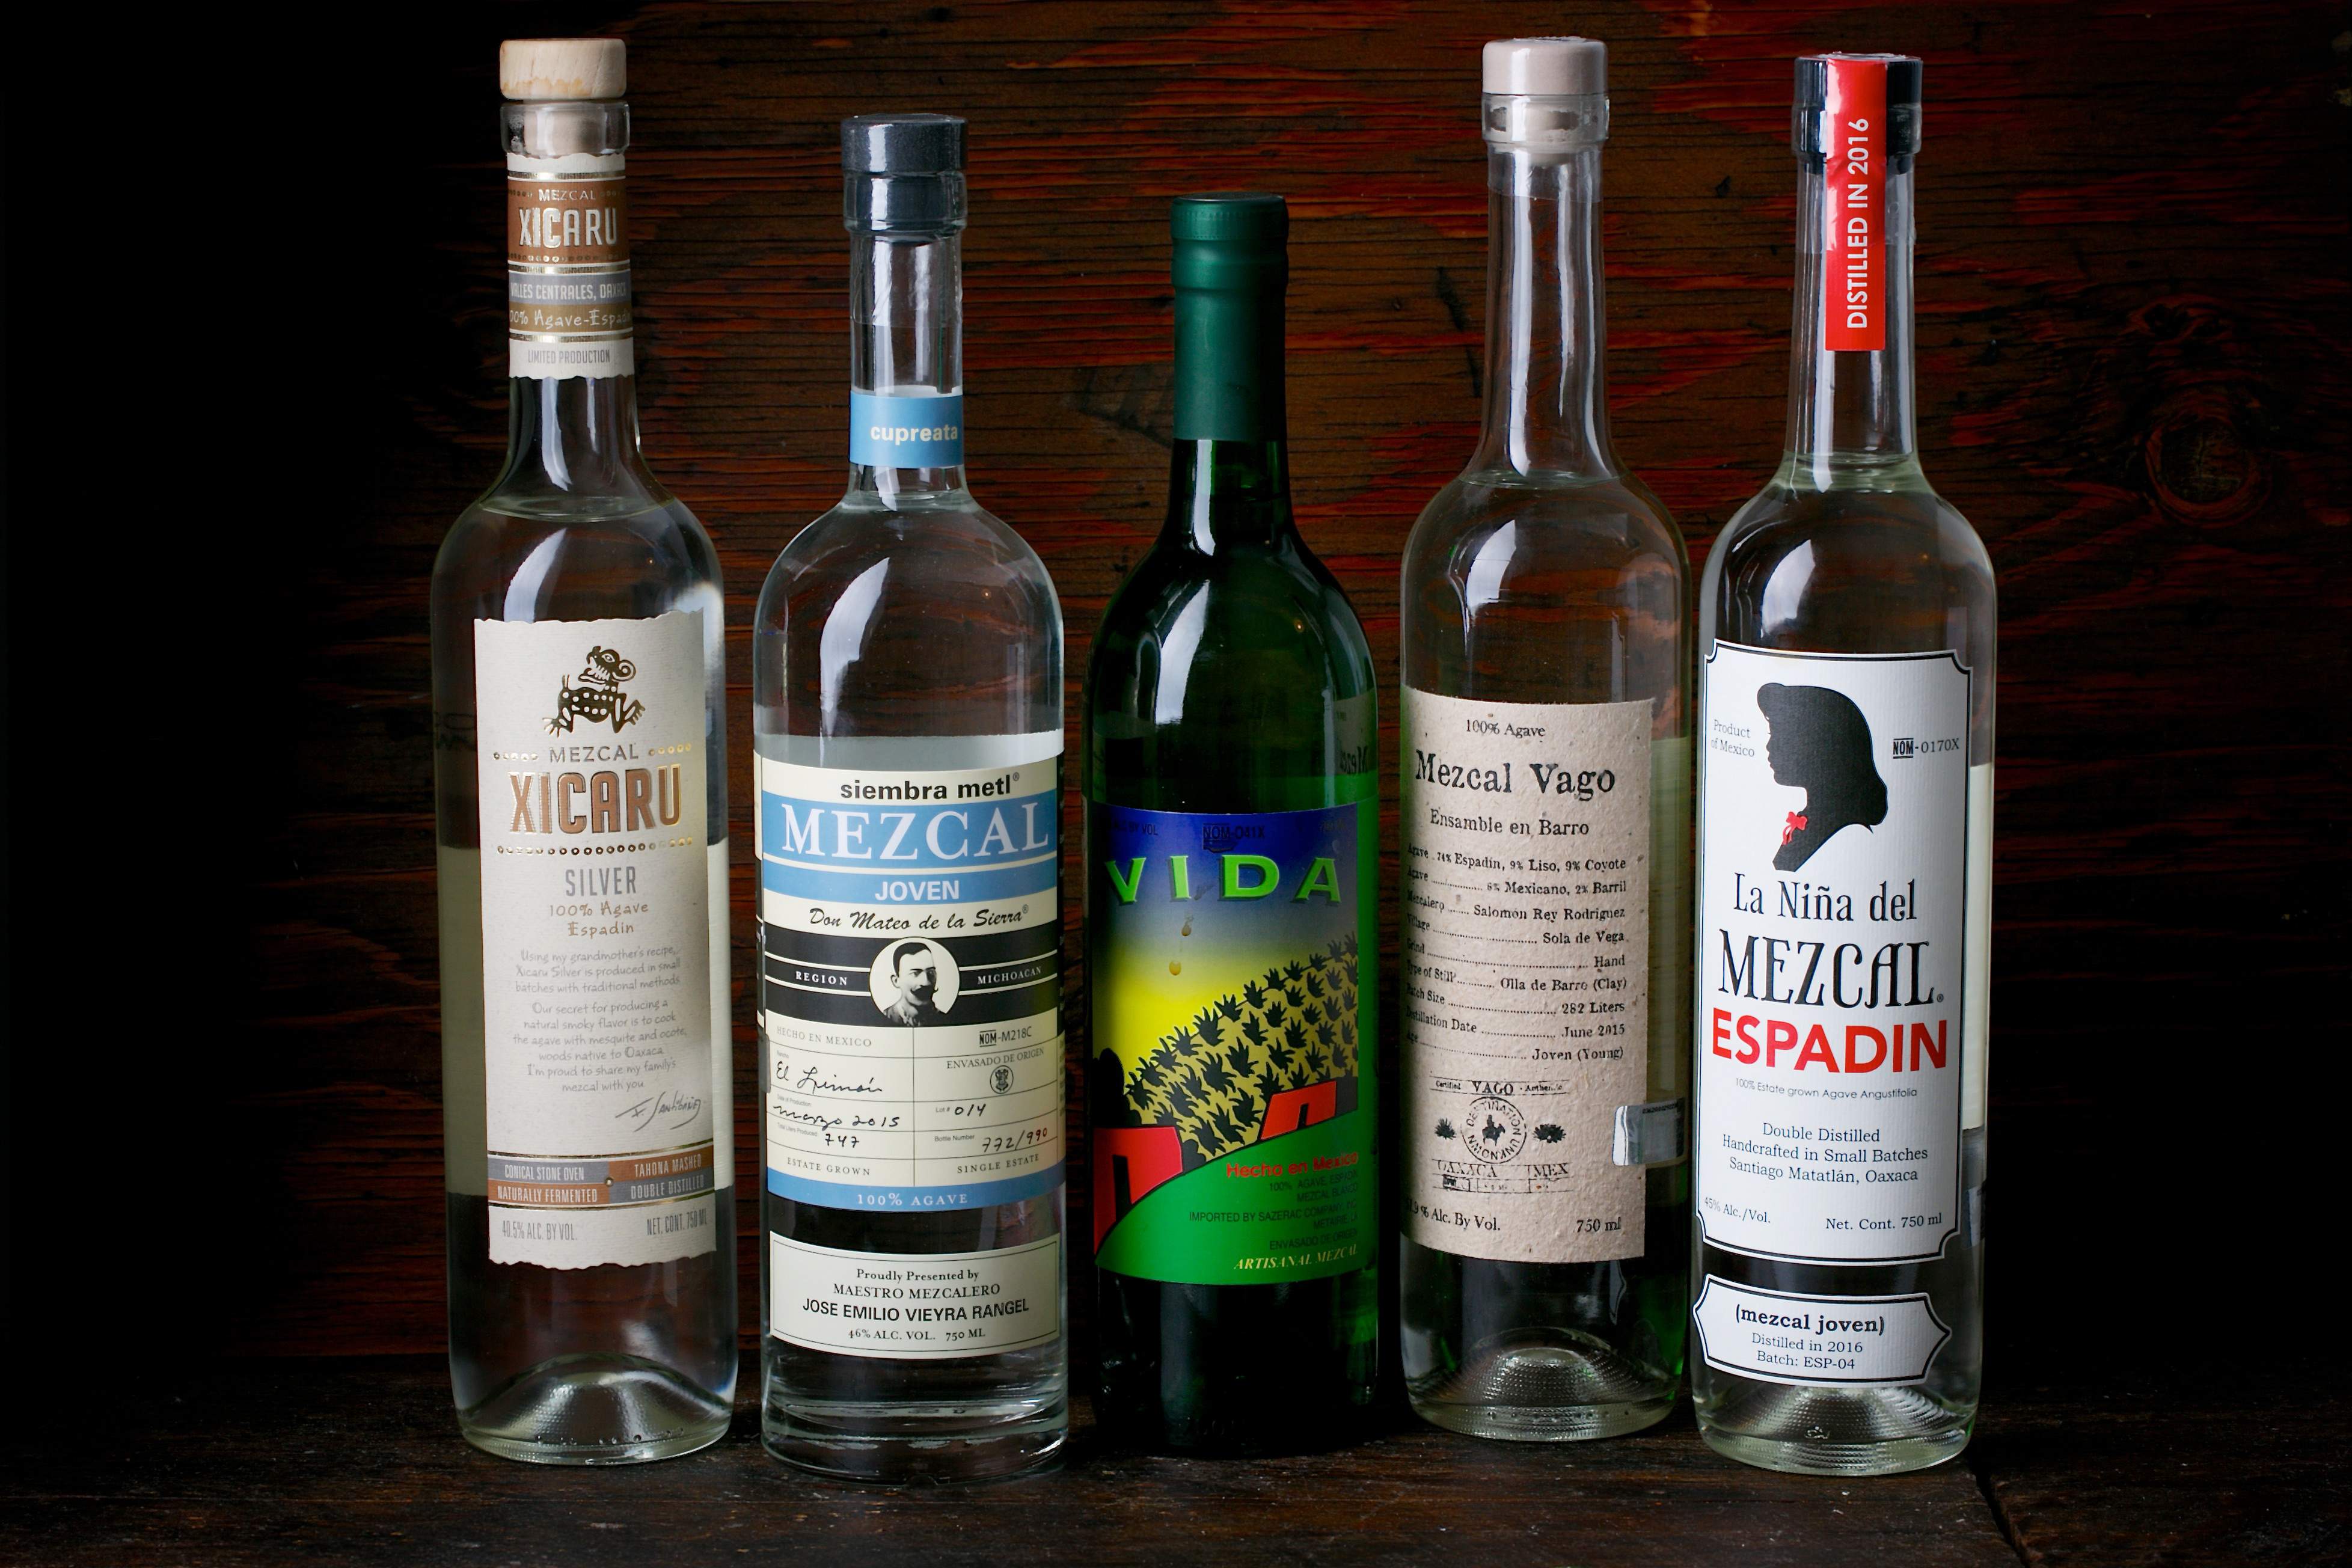 There's a lot more to mezcal than meets the label